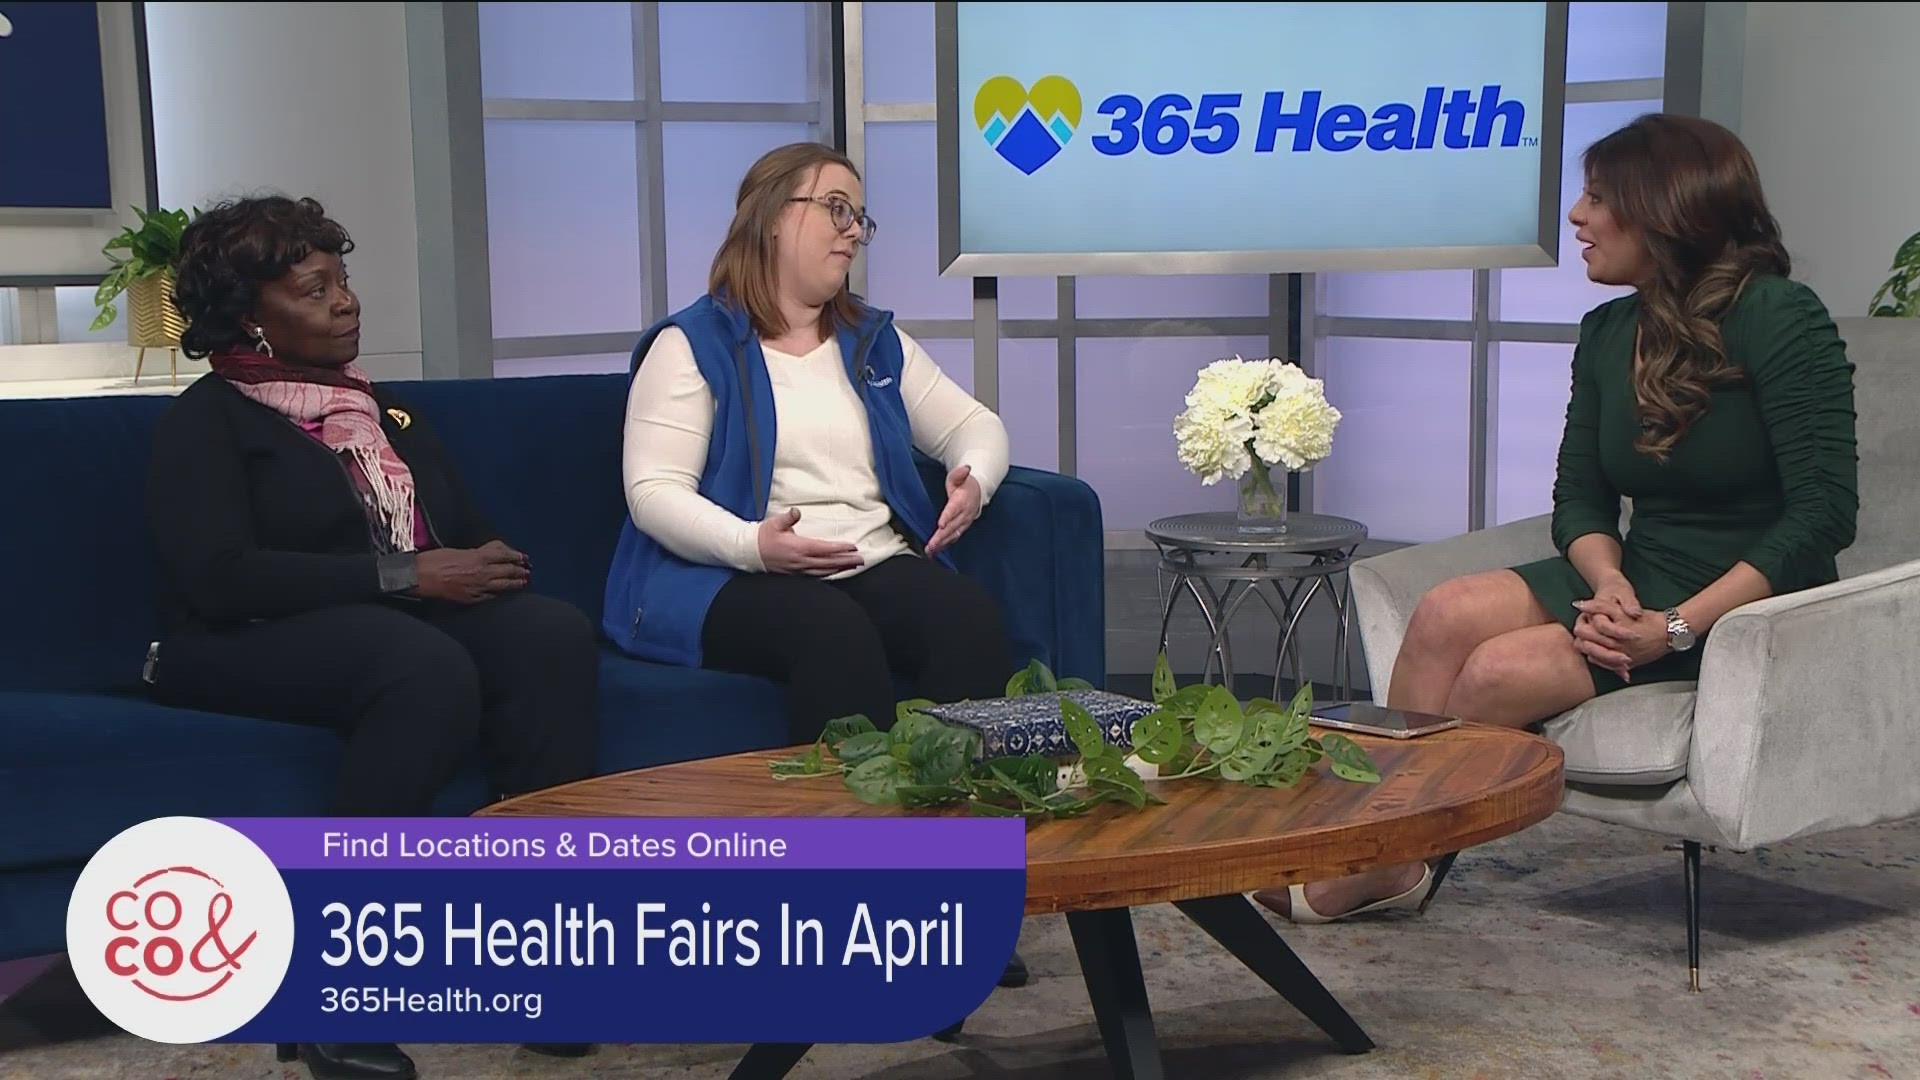 365Health will be hosting 40 health fairs this spring! Visit 365Health.org to find one near you.